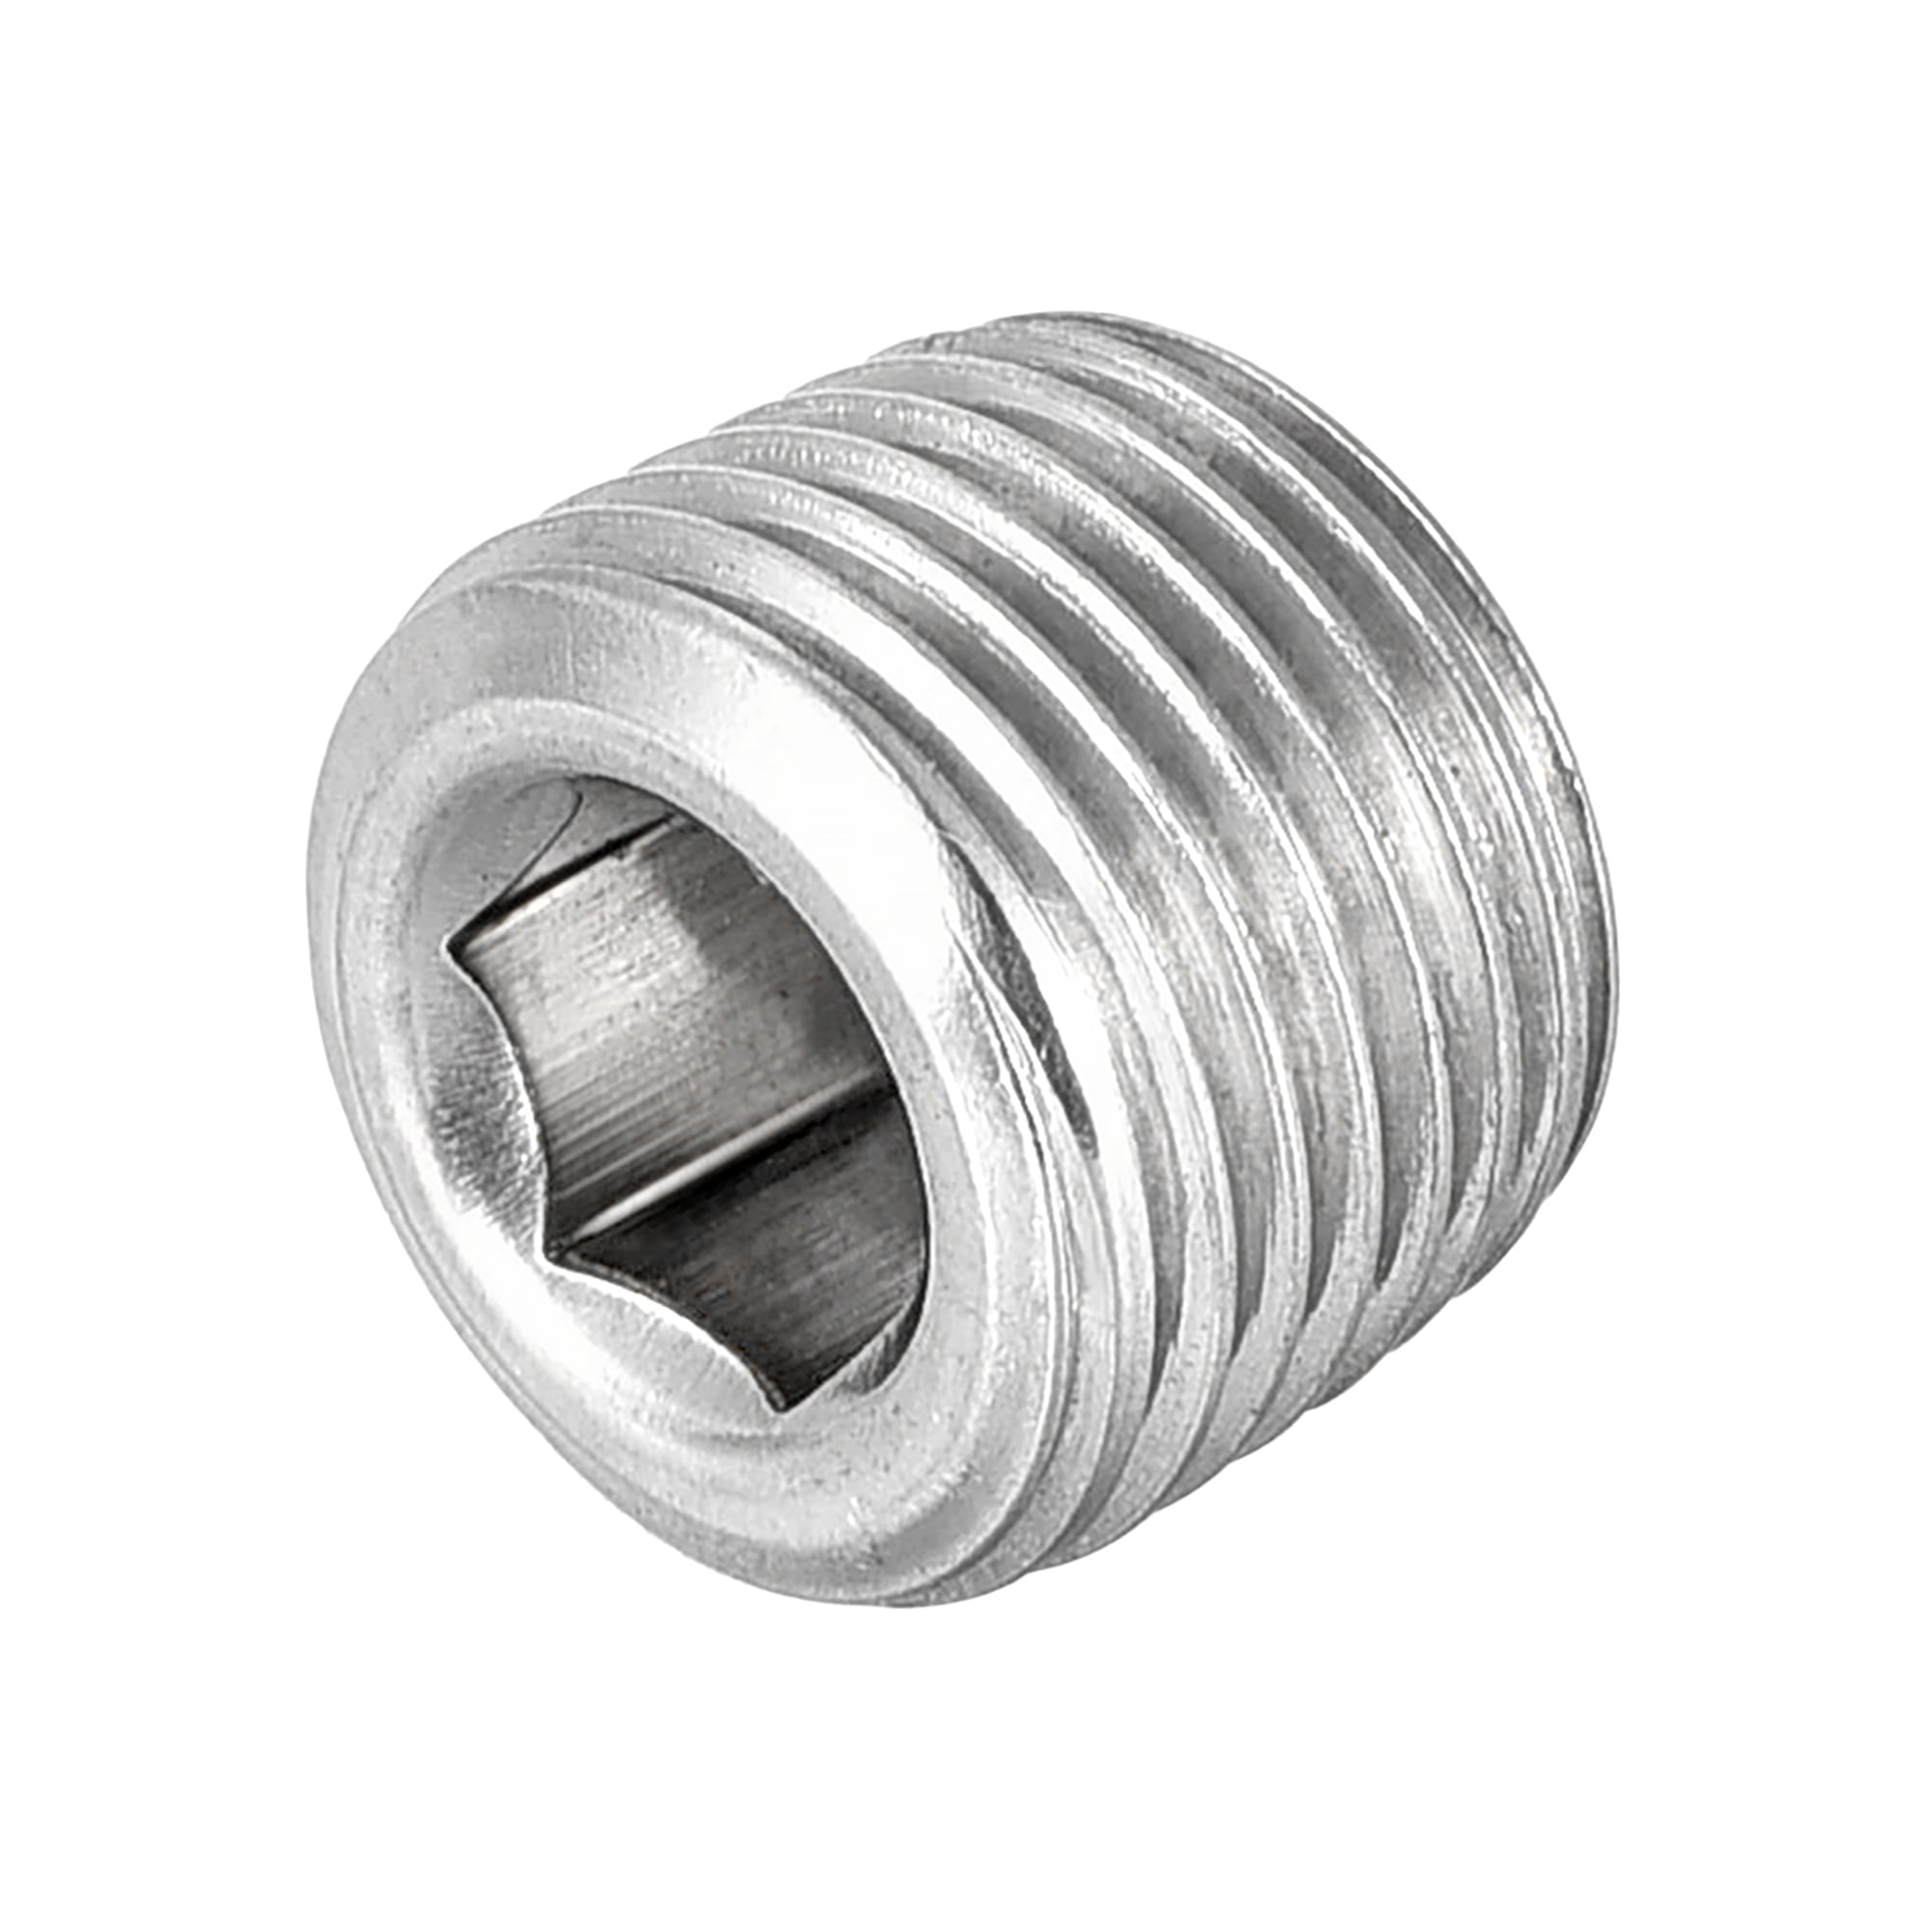 Details about   Hex Countersunk Plug Stainless Steel Pipe Fitting 1/8NPT Male Thread Socket 